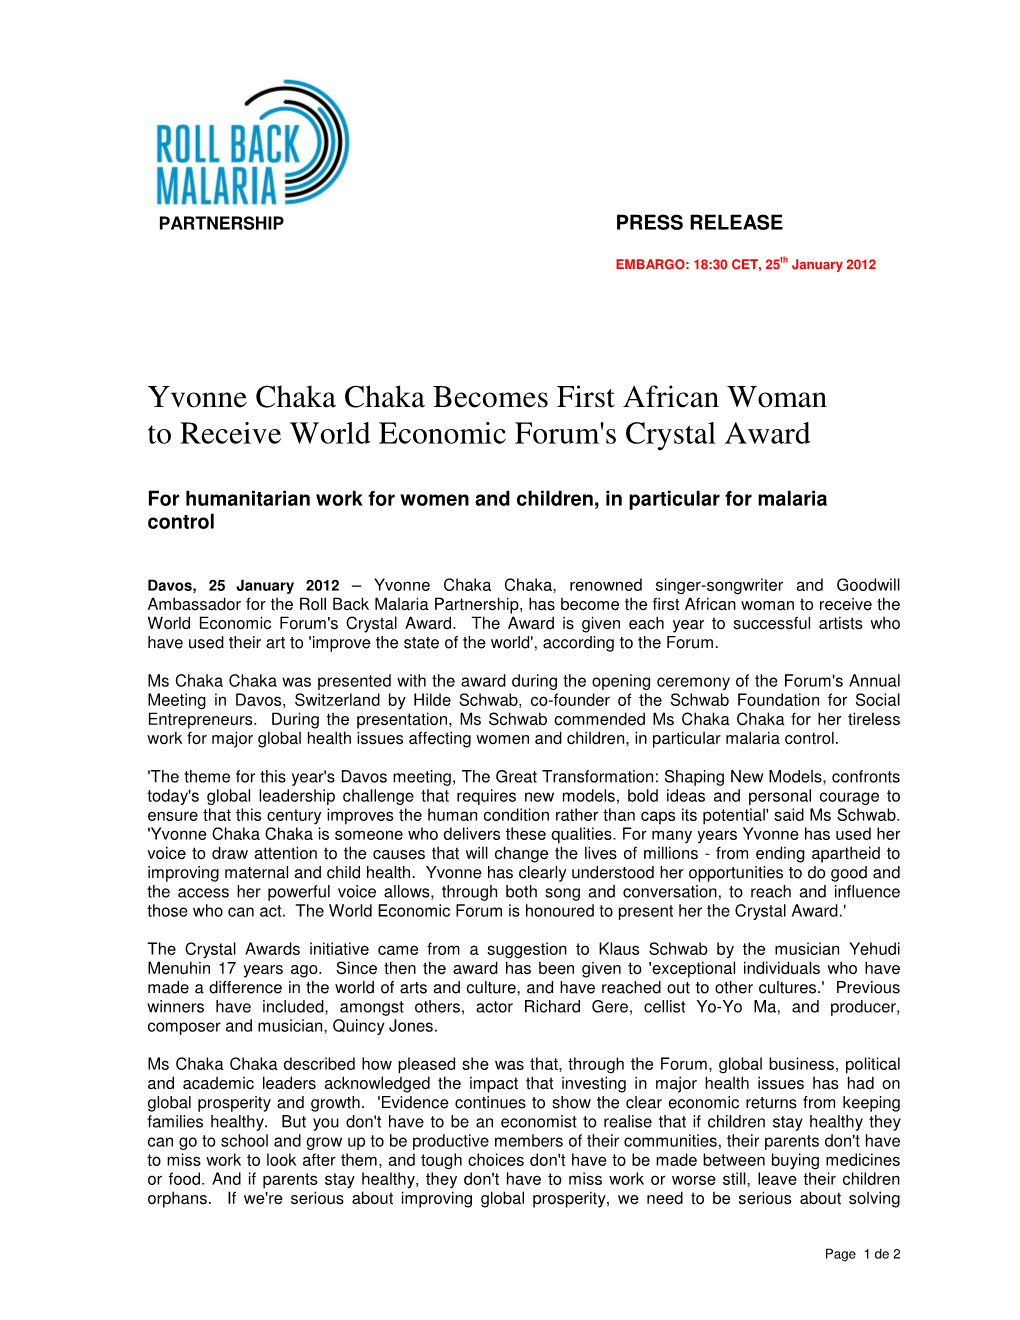 Yvonne Chaka Chaka Becomes First African Woman to Receive World Economic Forum's Crystal Award